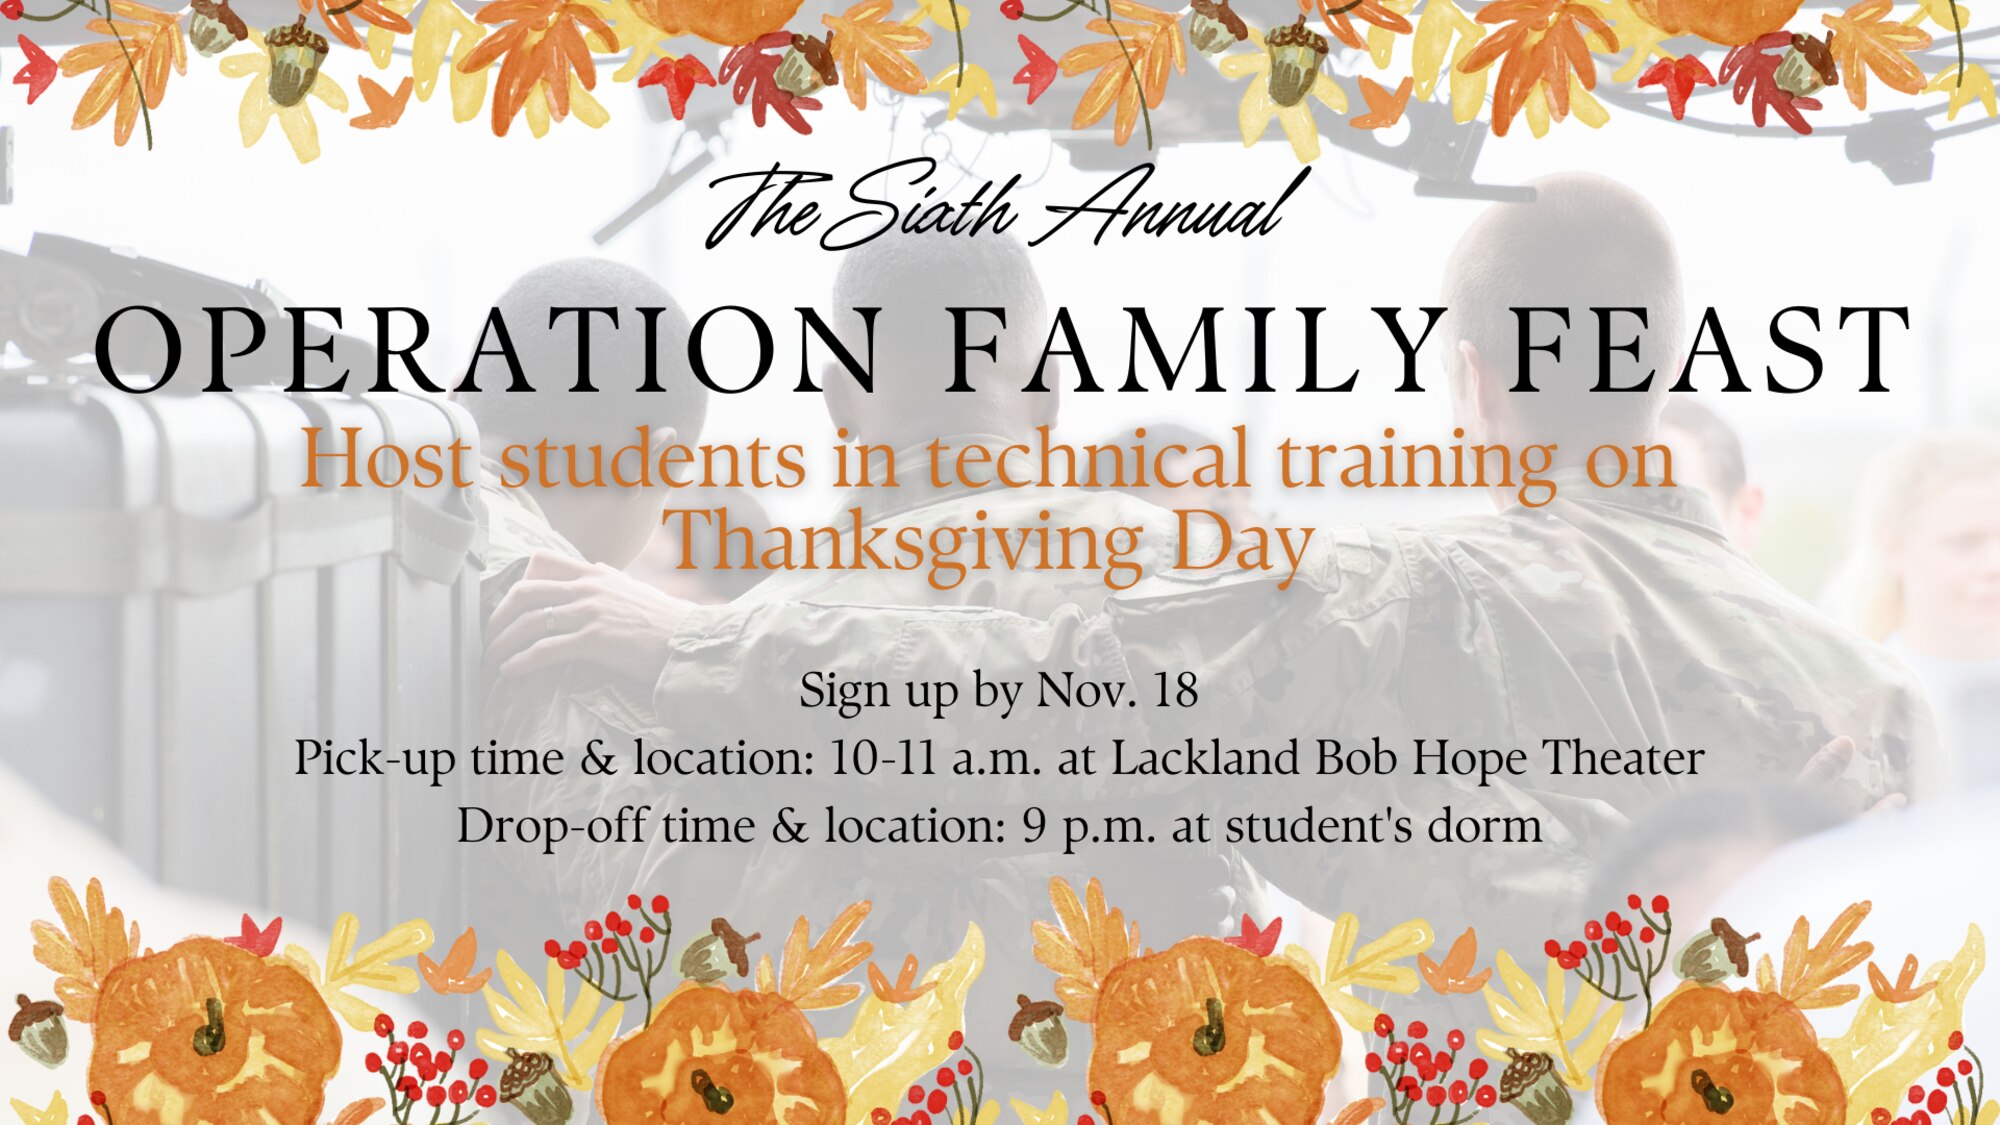 Operation Family Feast graphic with fall-related borders on top and bottom (includes flowers, pumpkins, leaves).